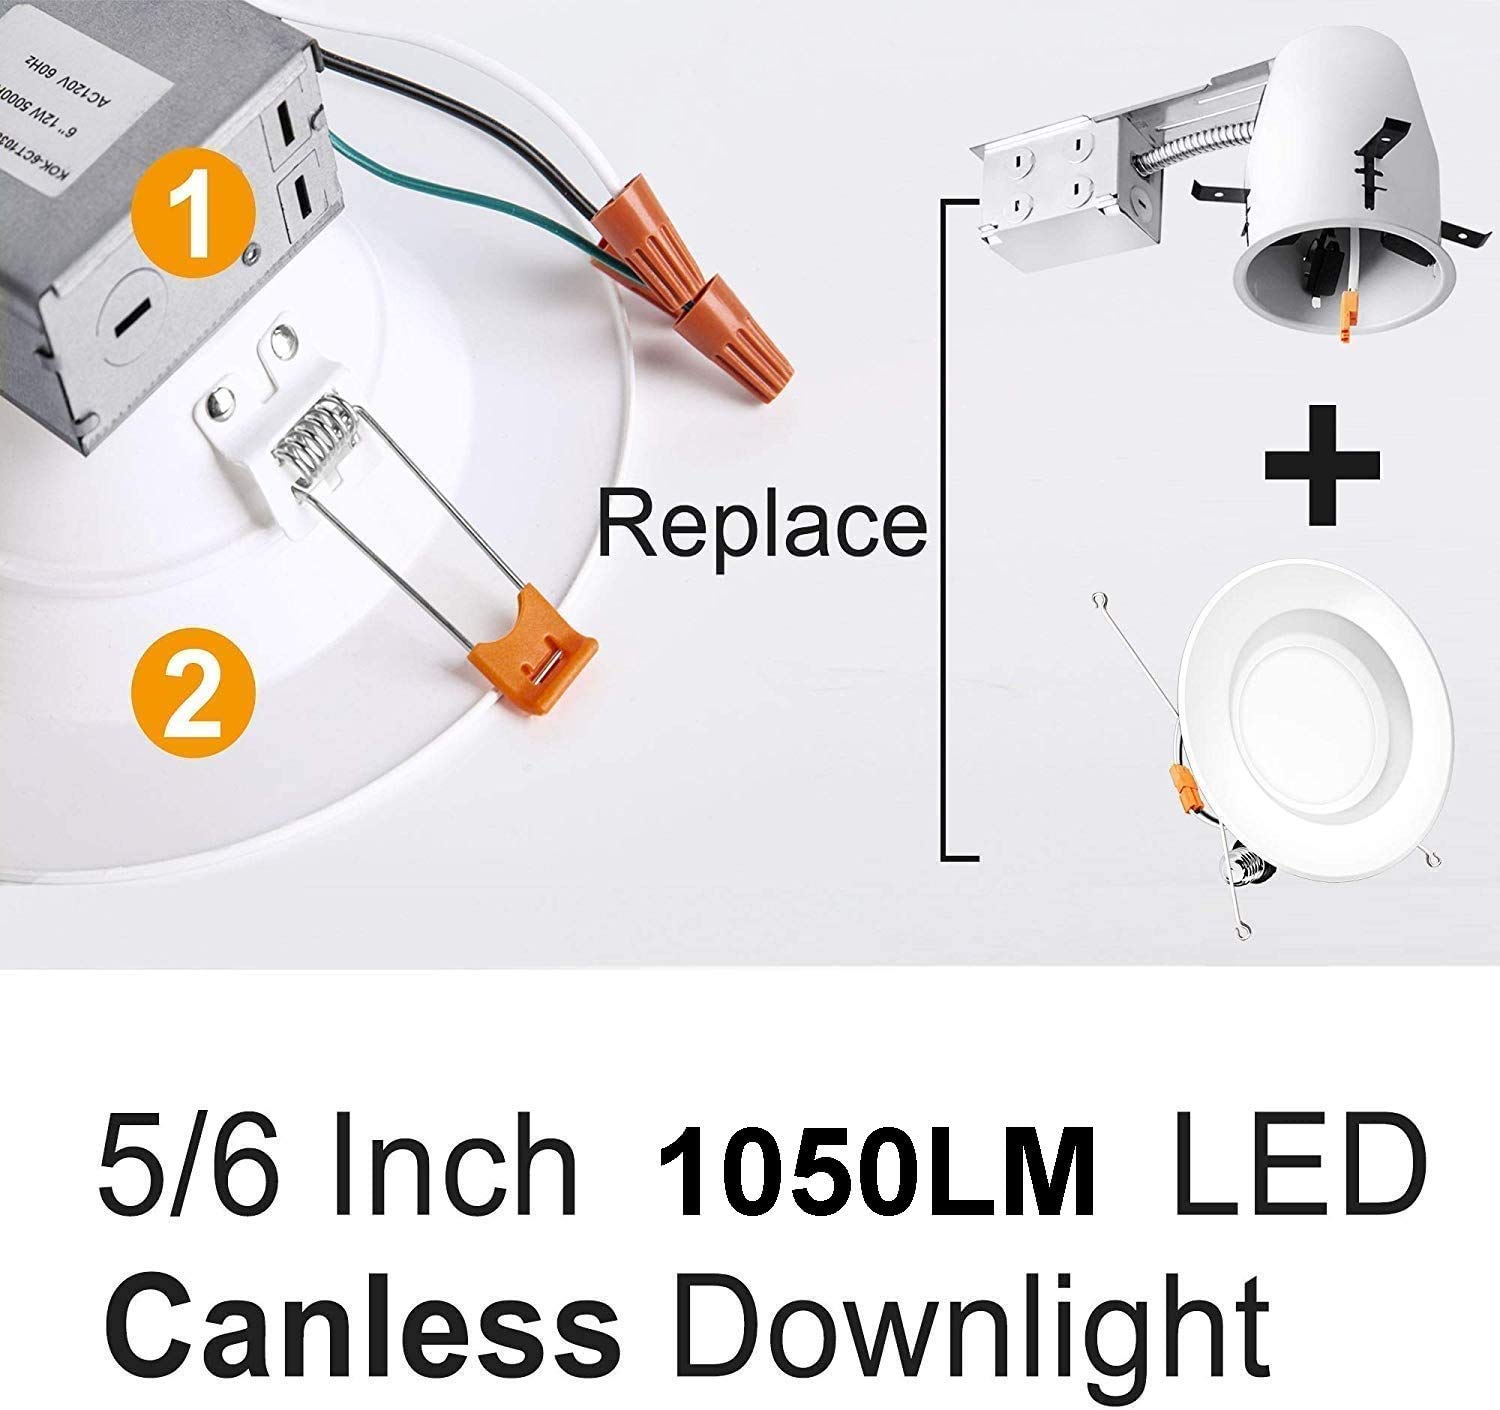 24Pack 6Inch Slim LED Downlight with Junction Box LED Recessed Lights with Integrated Junction Box Canless Light 5 Color CCT Tunable Integrated Junction Box 14W 1050LM Dimmable Recessed Jbox Fixture